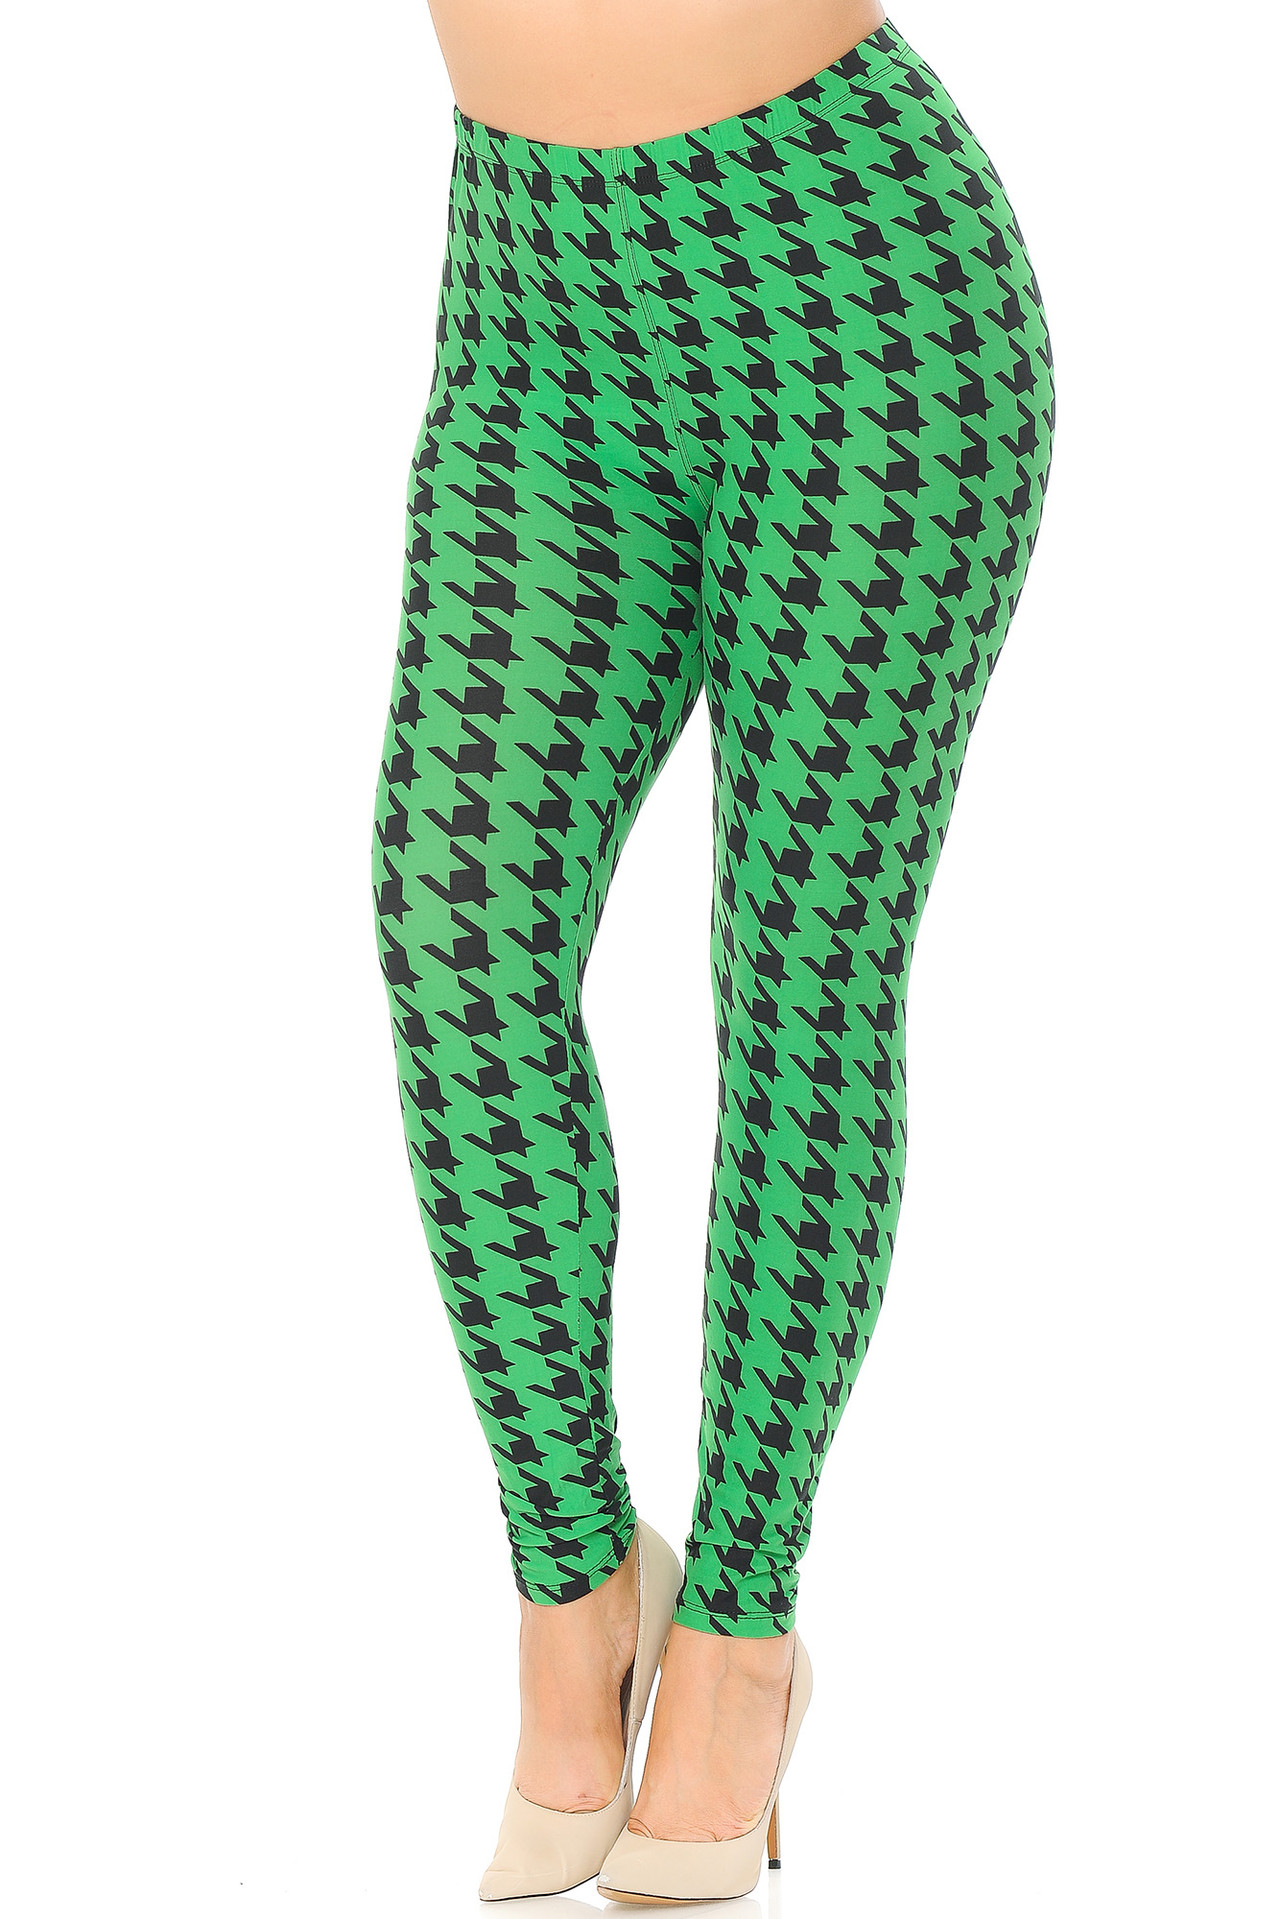 Buttery Smooth Colorful Polka Dot Plus Size Leggings - 3X-5X